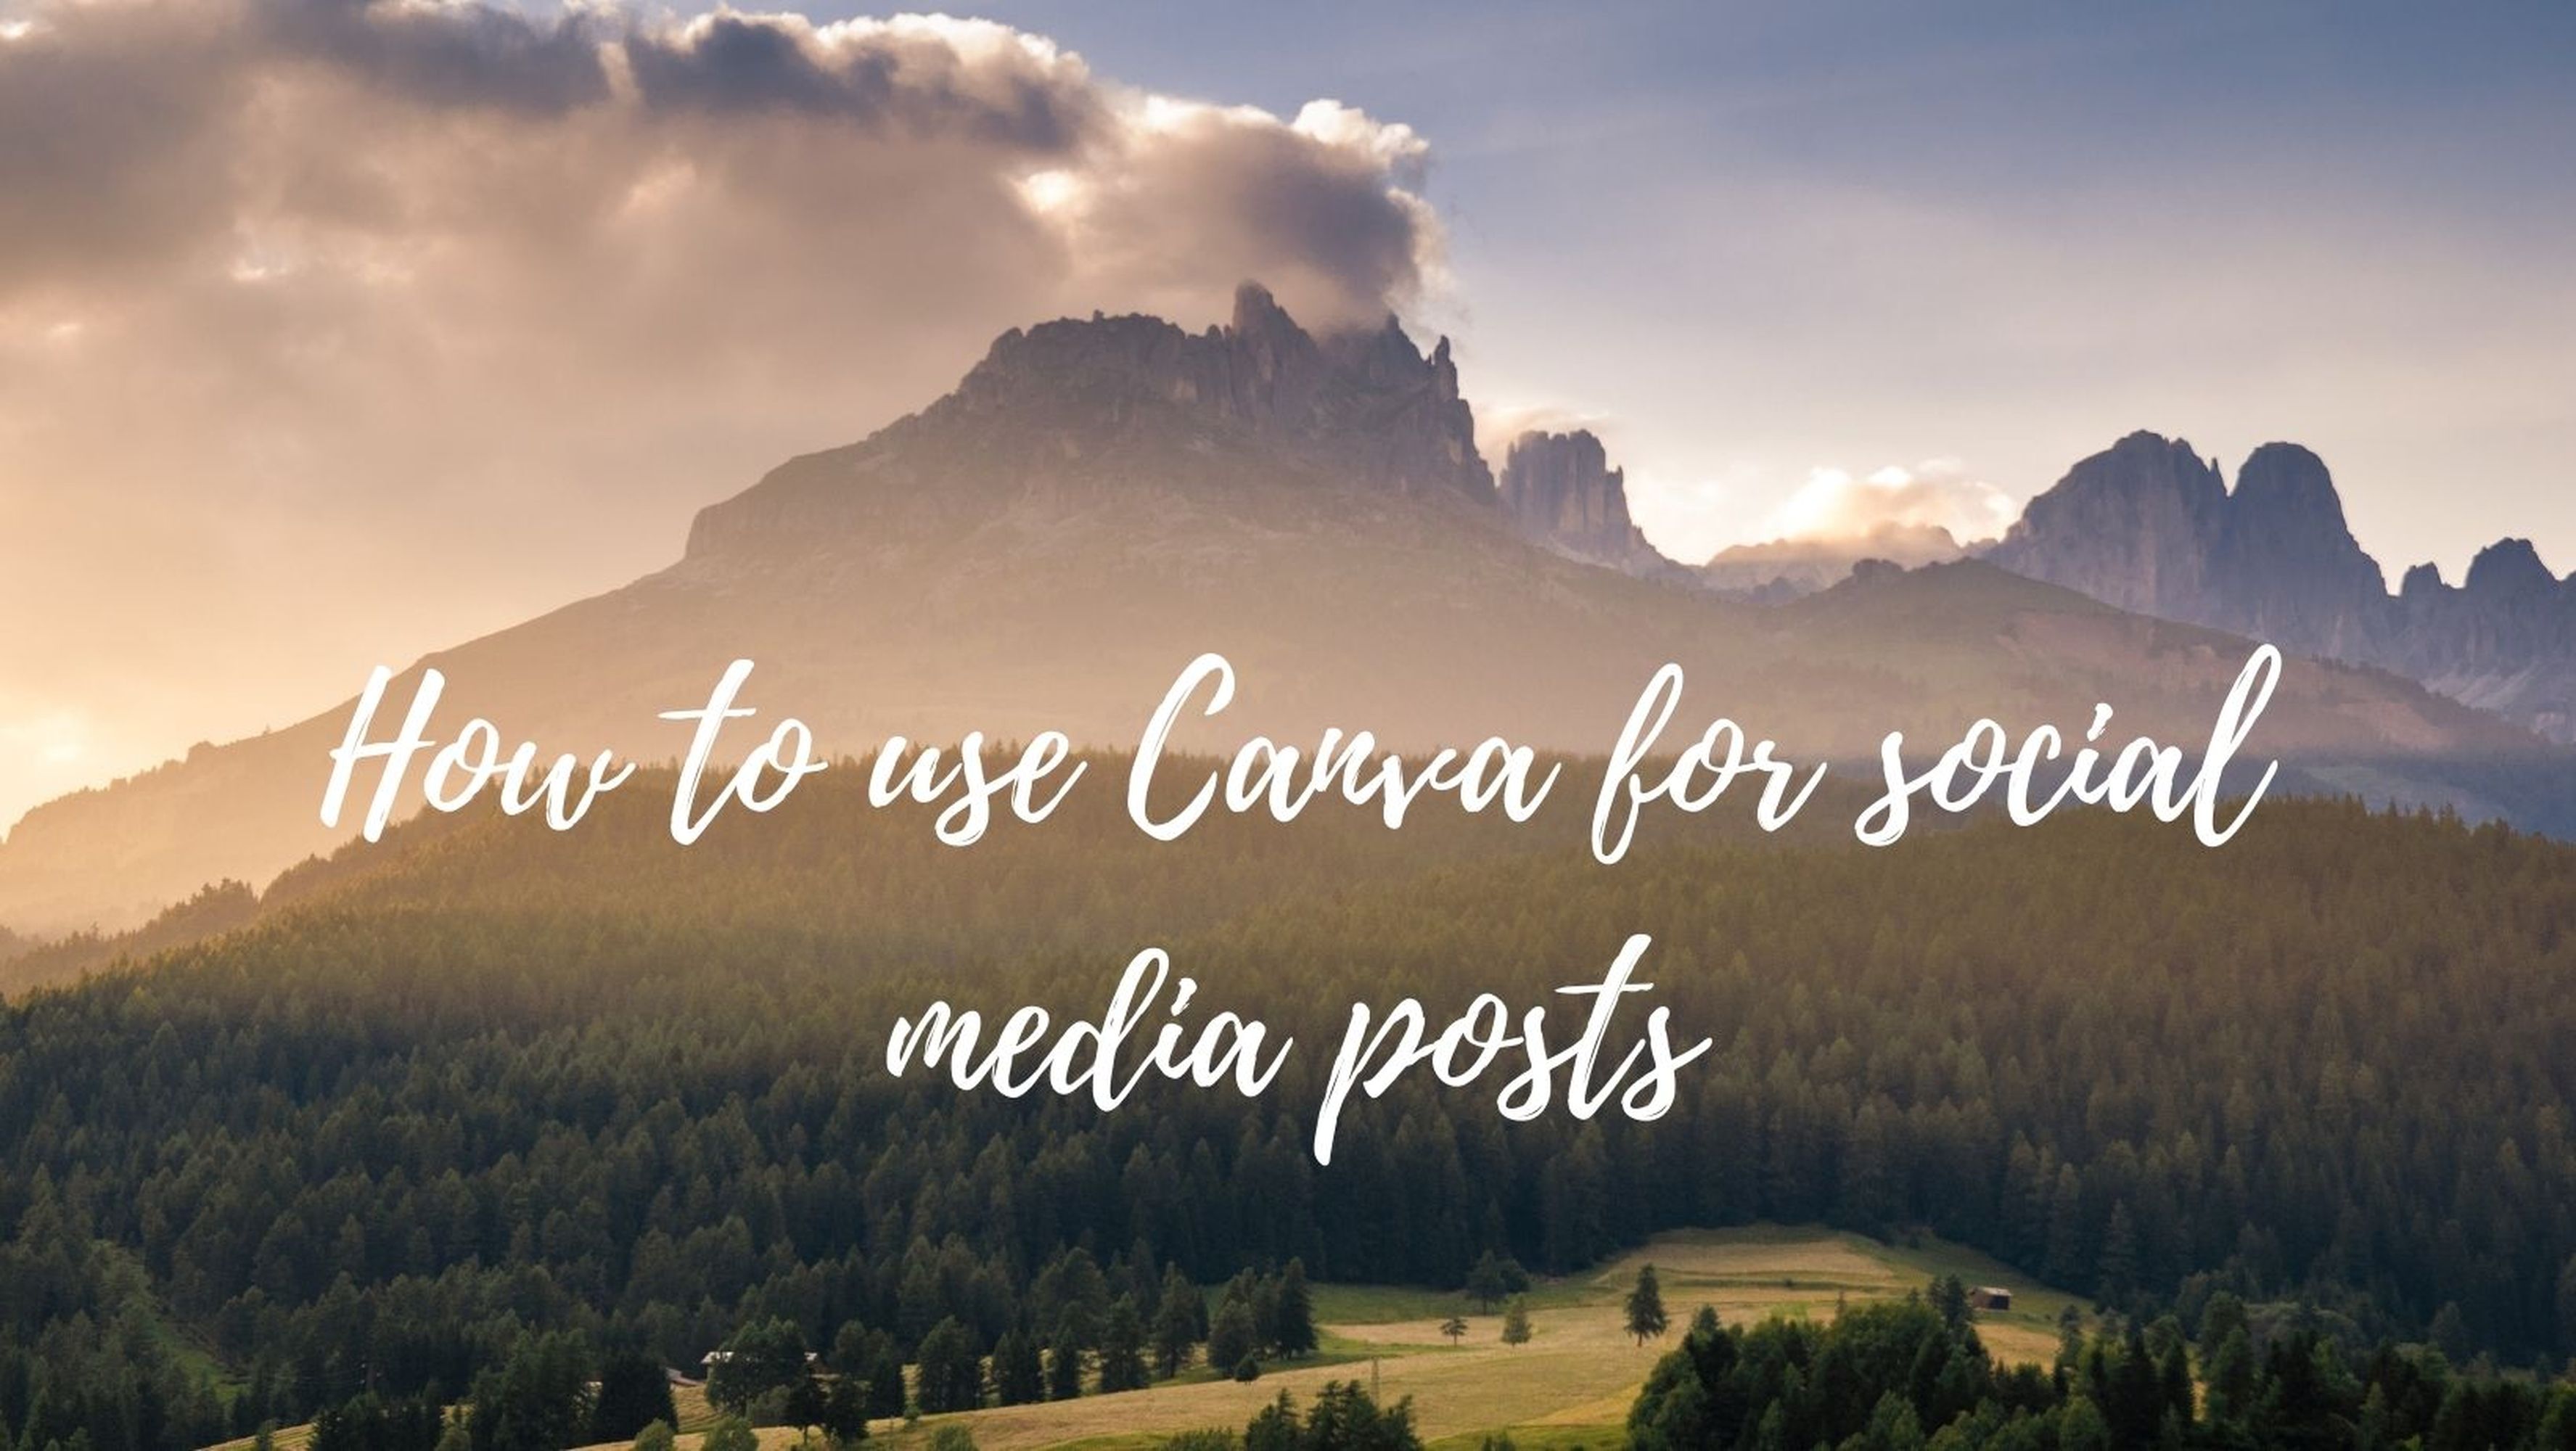 Want to up the graphic design of your Instagram? Canva wants to help.